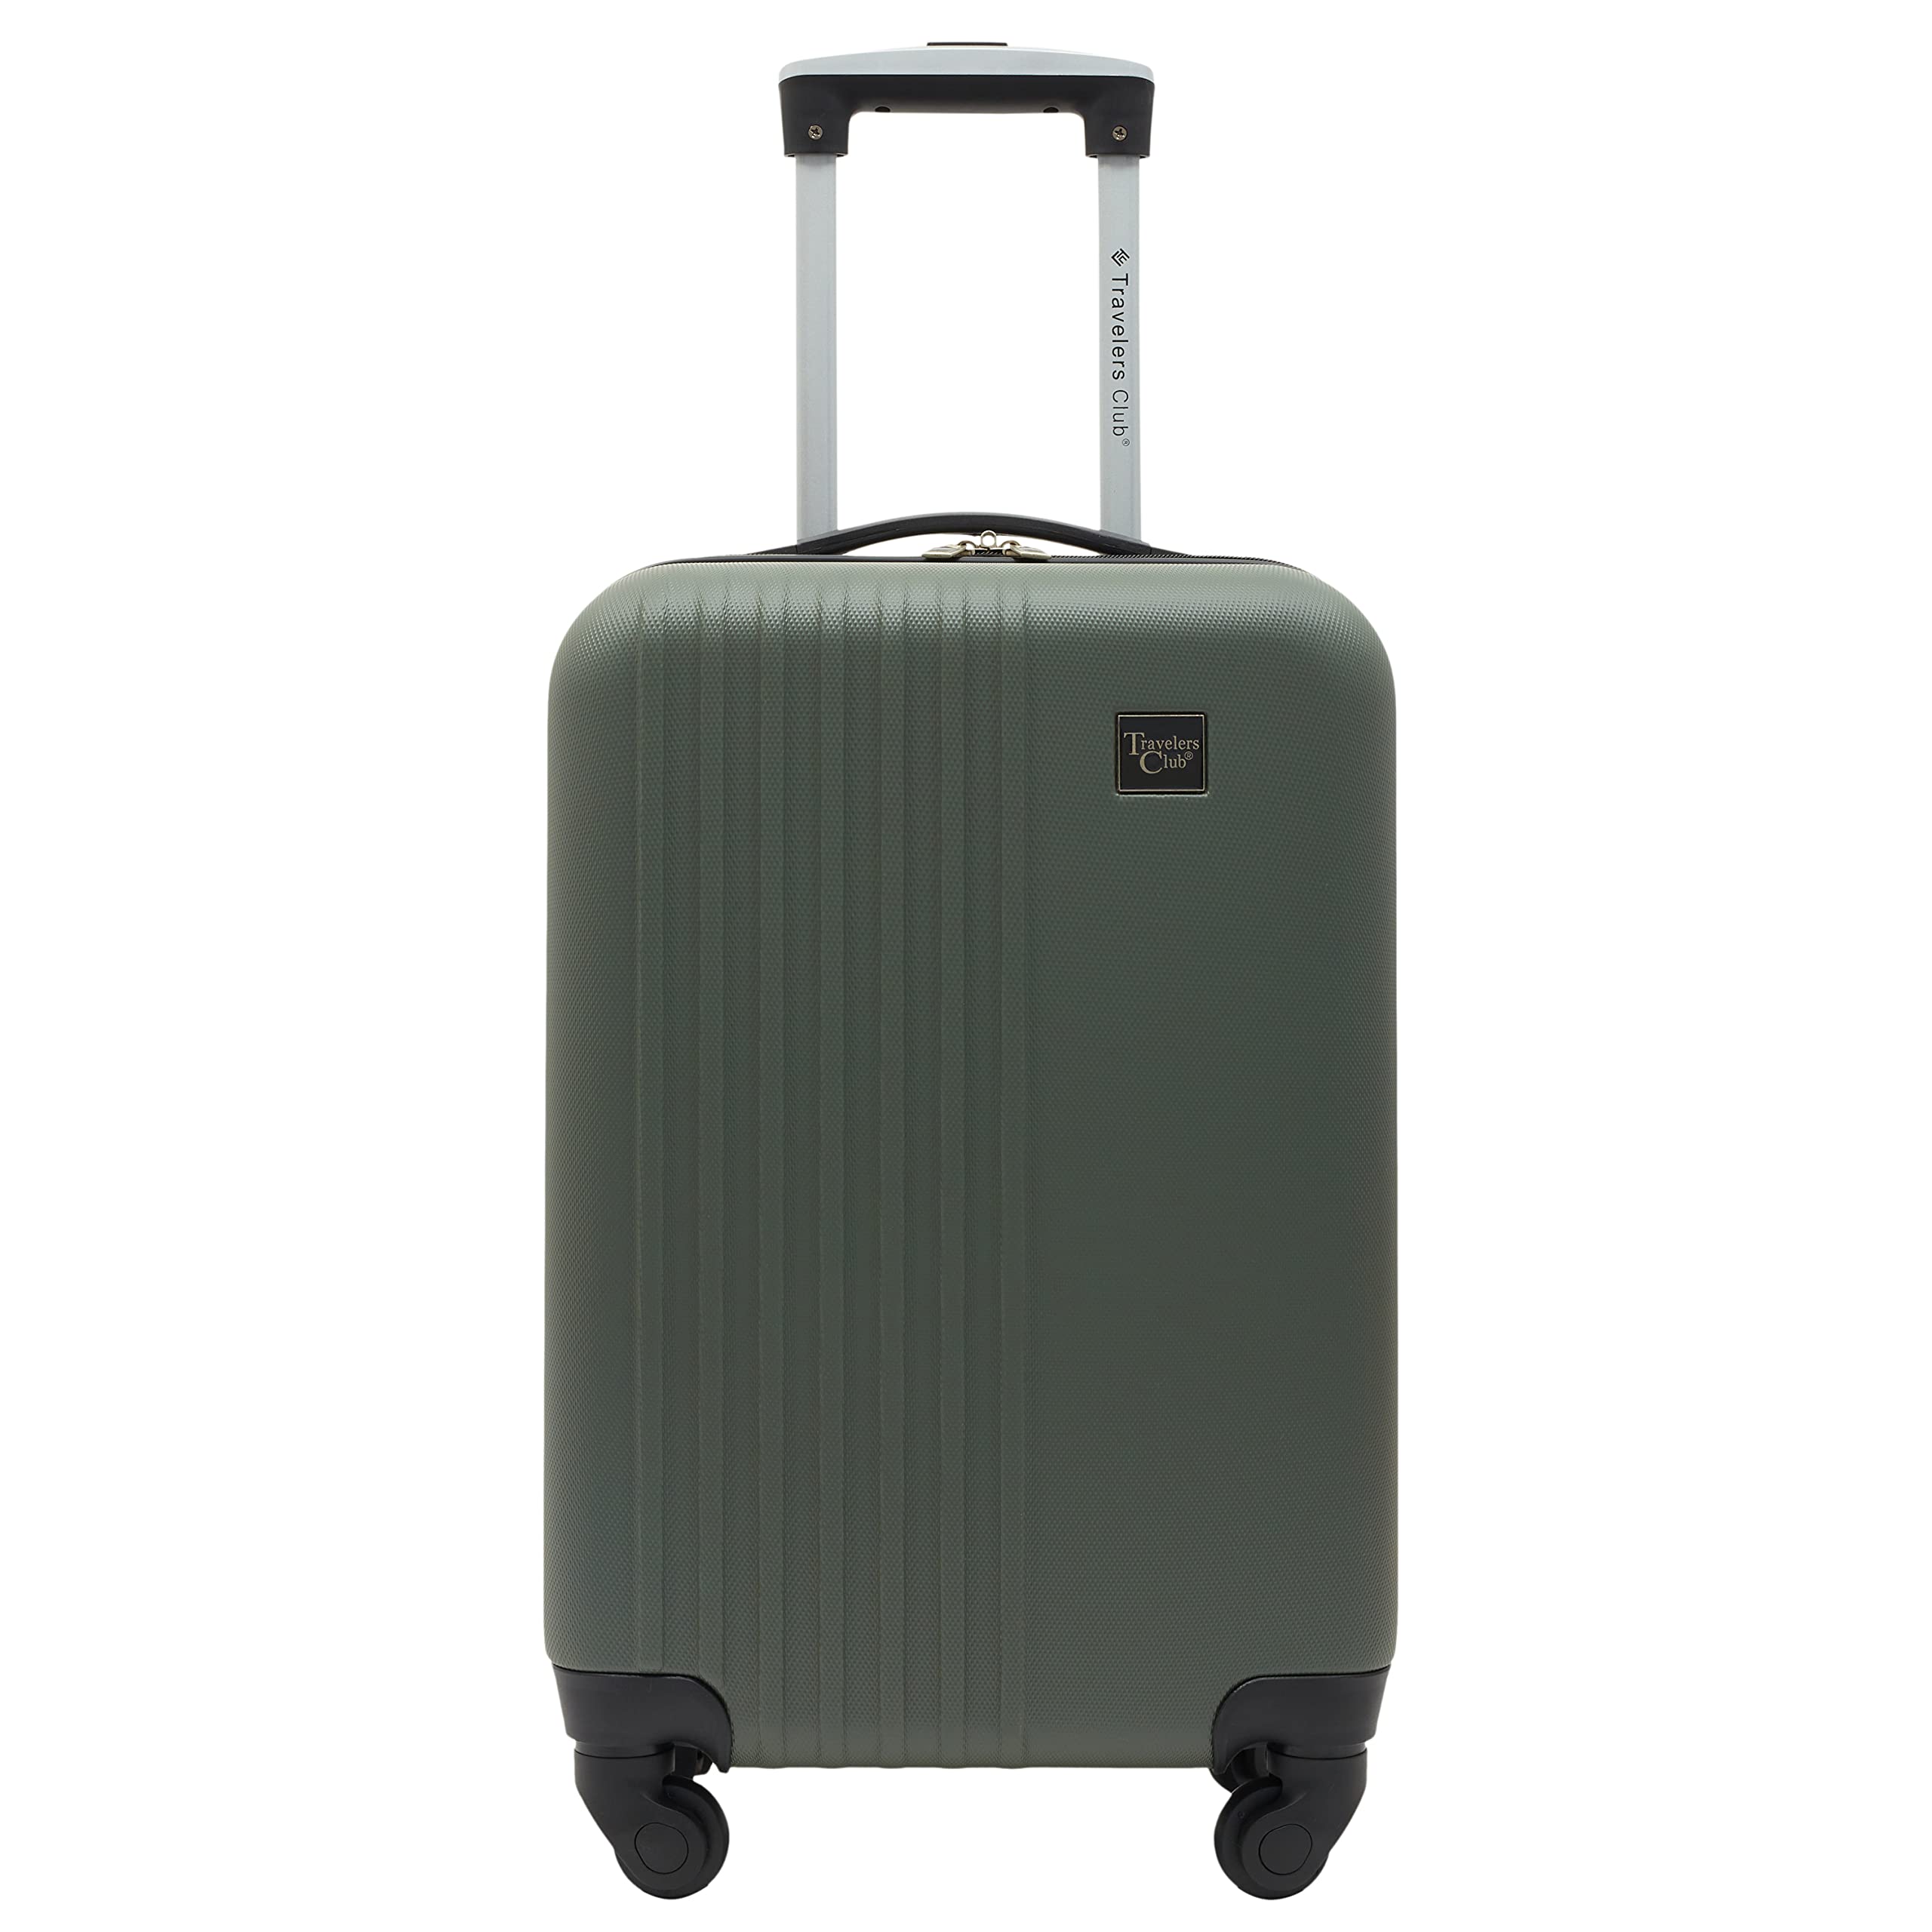 Travelers Club Cosmo Hardside Spinner Luggage, Fern Green, Carry-On 20-Inch